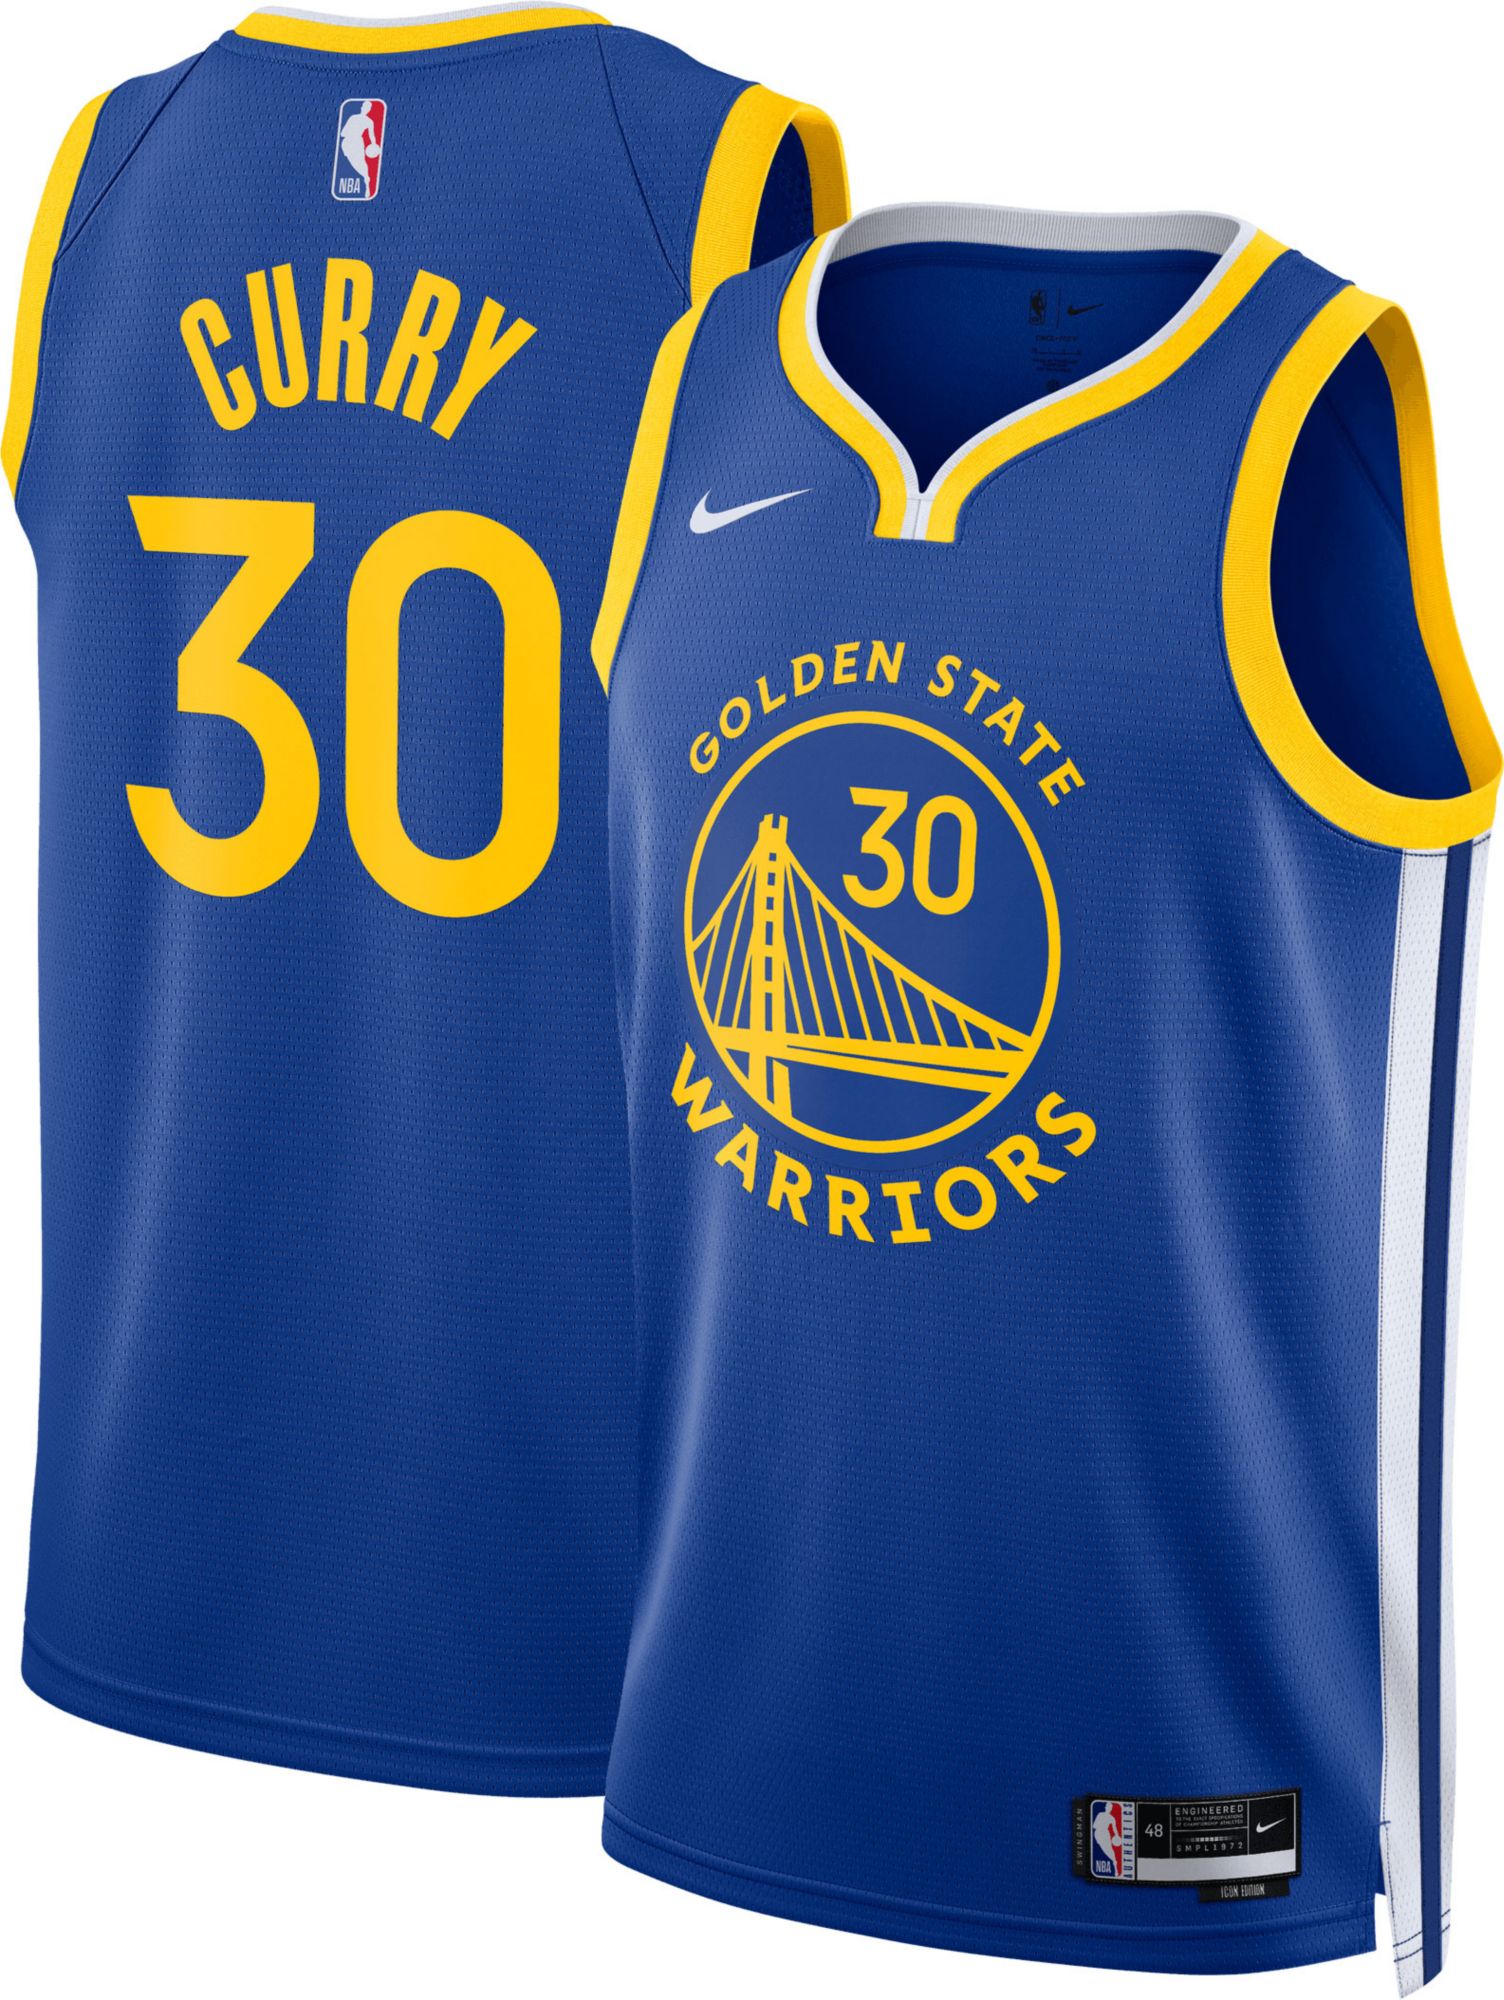 steph curry jersey tee